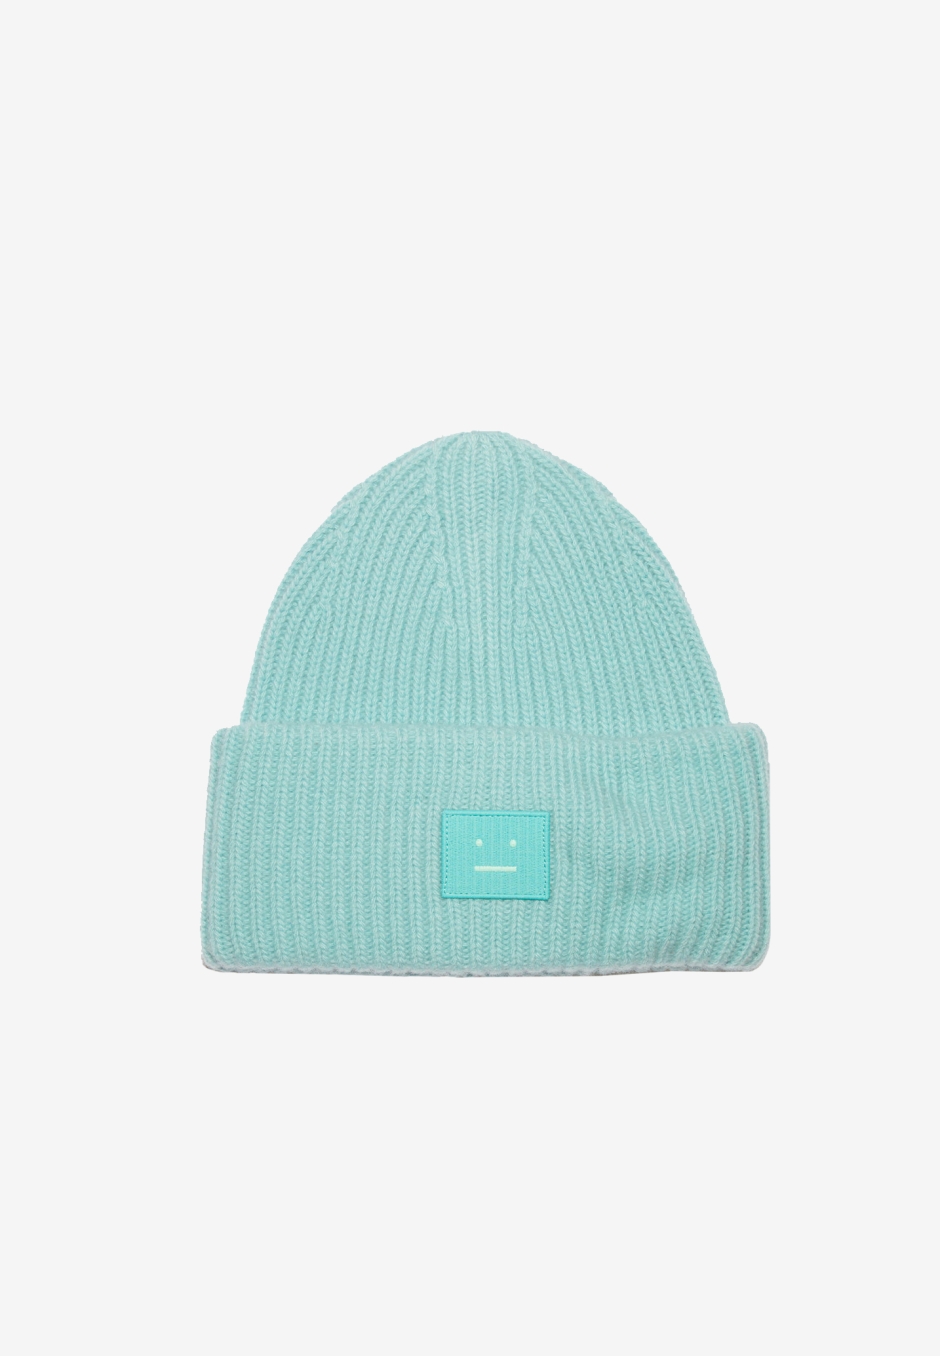 Acne Studios Ribbed Beanie Hat Turquoise Blue